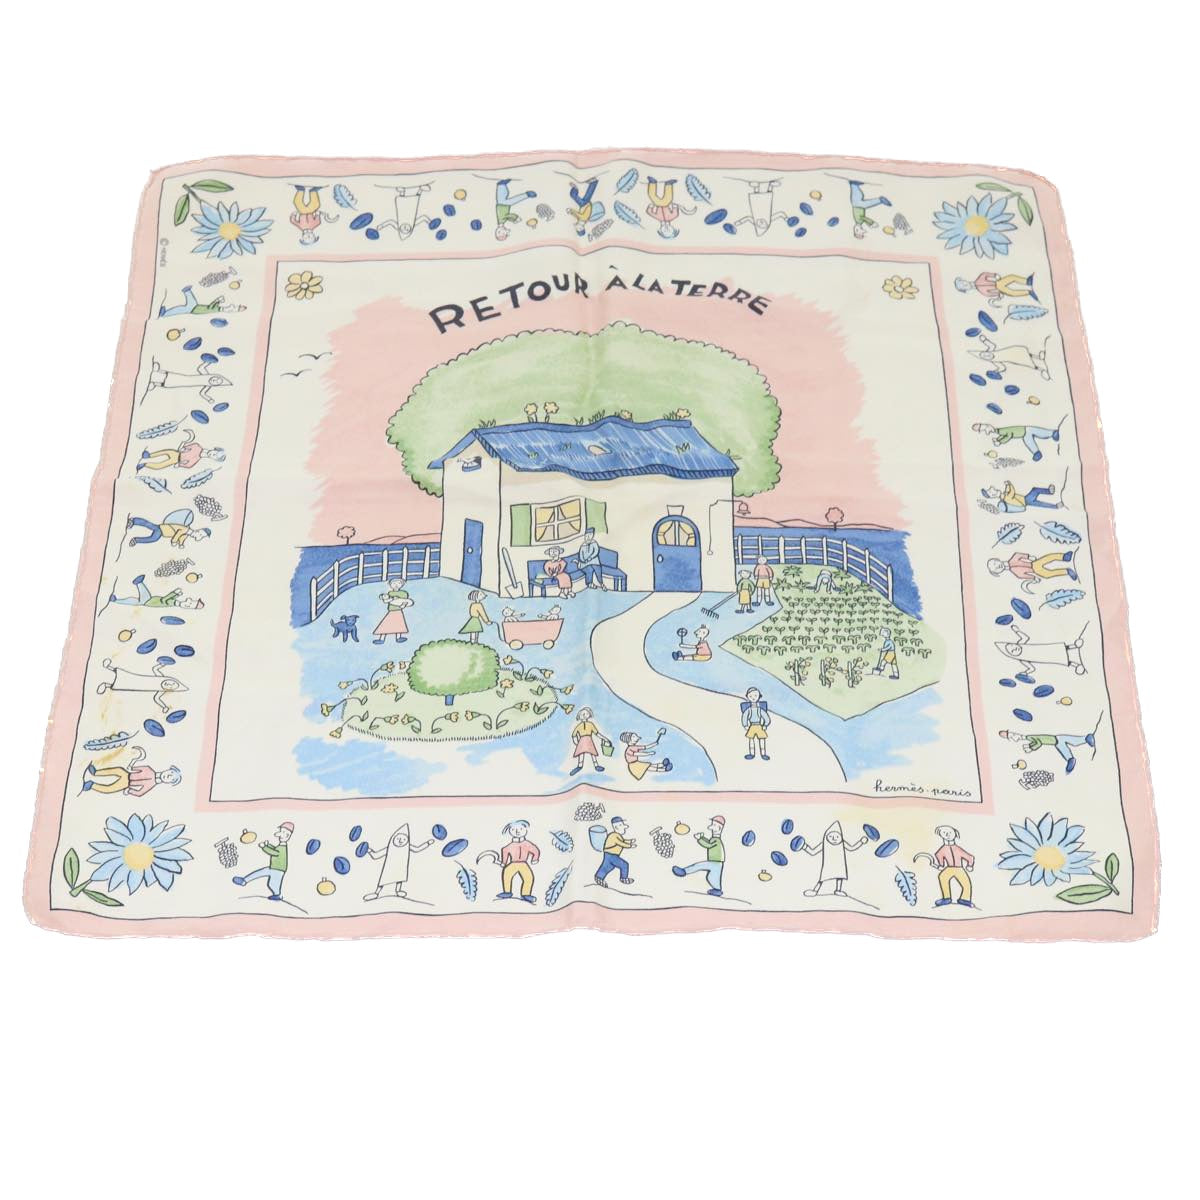 HERMES Carre 40 Scarf Silk 2Set Pink Blue Auth bs8244 - 0